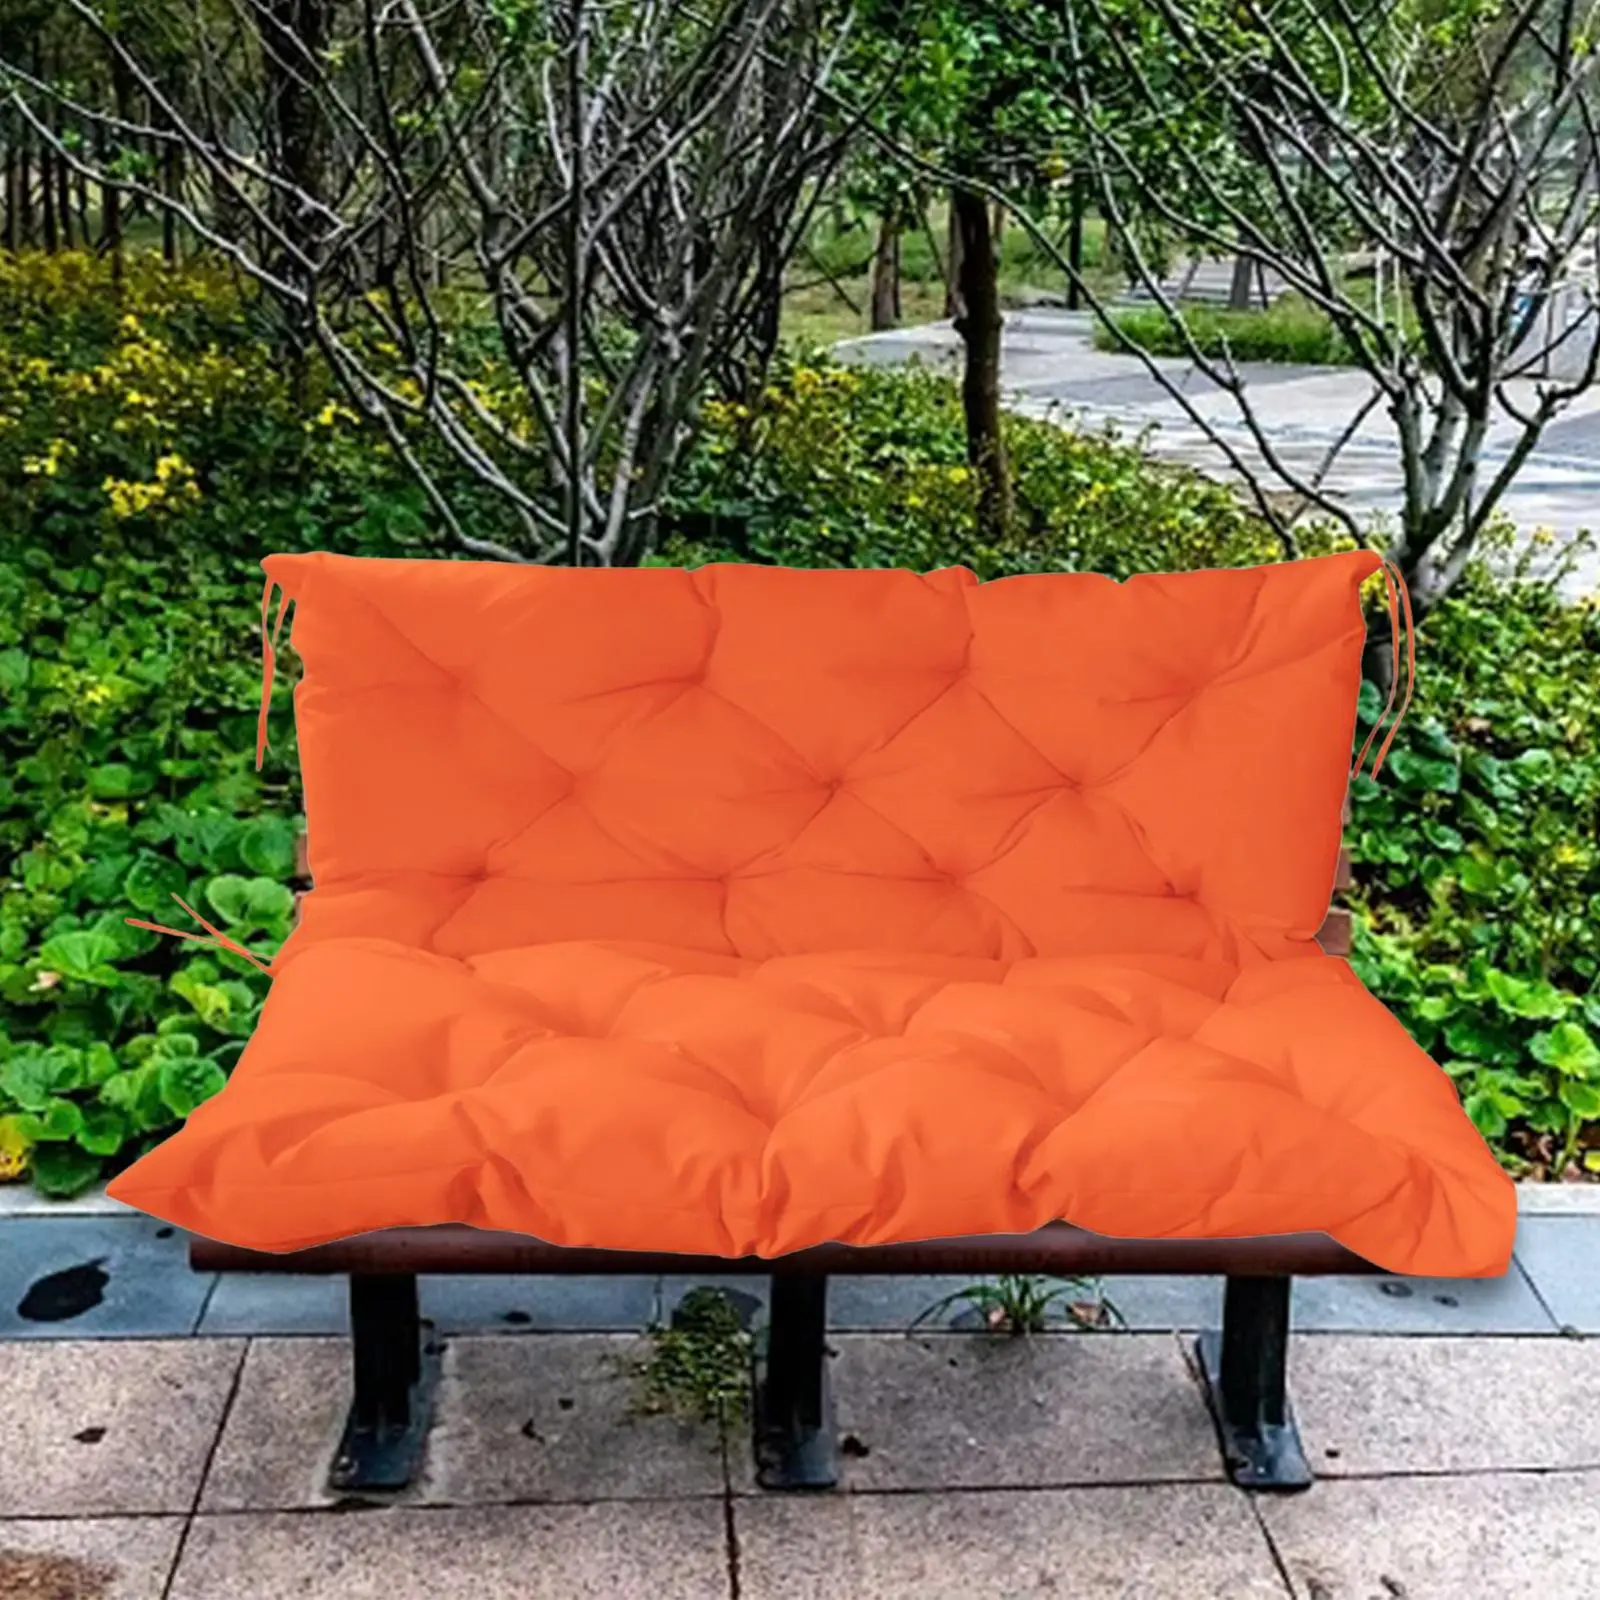 Swing Cushion Replacement Chair Back Cushions Pad for Garden Lawn Patio